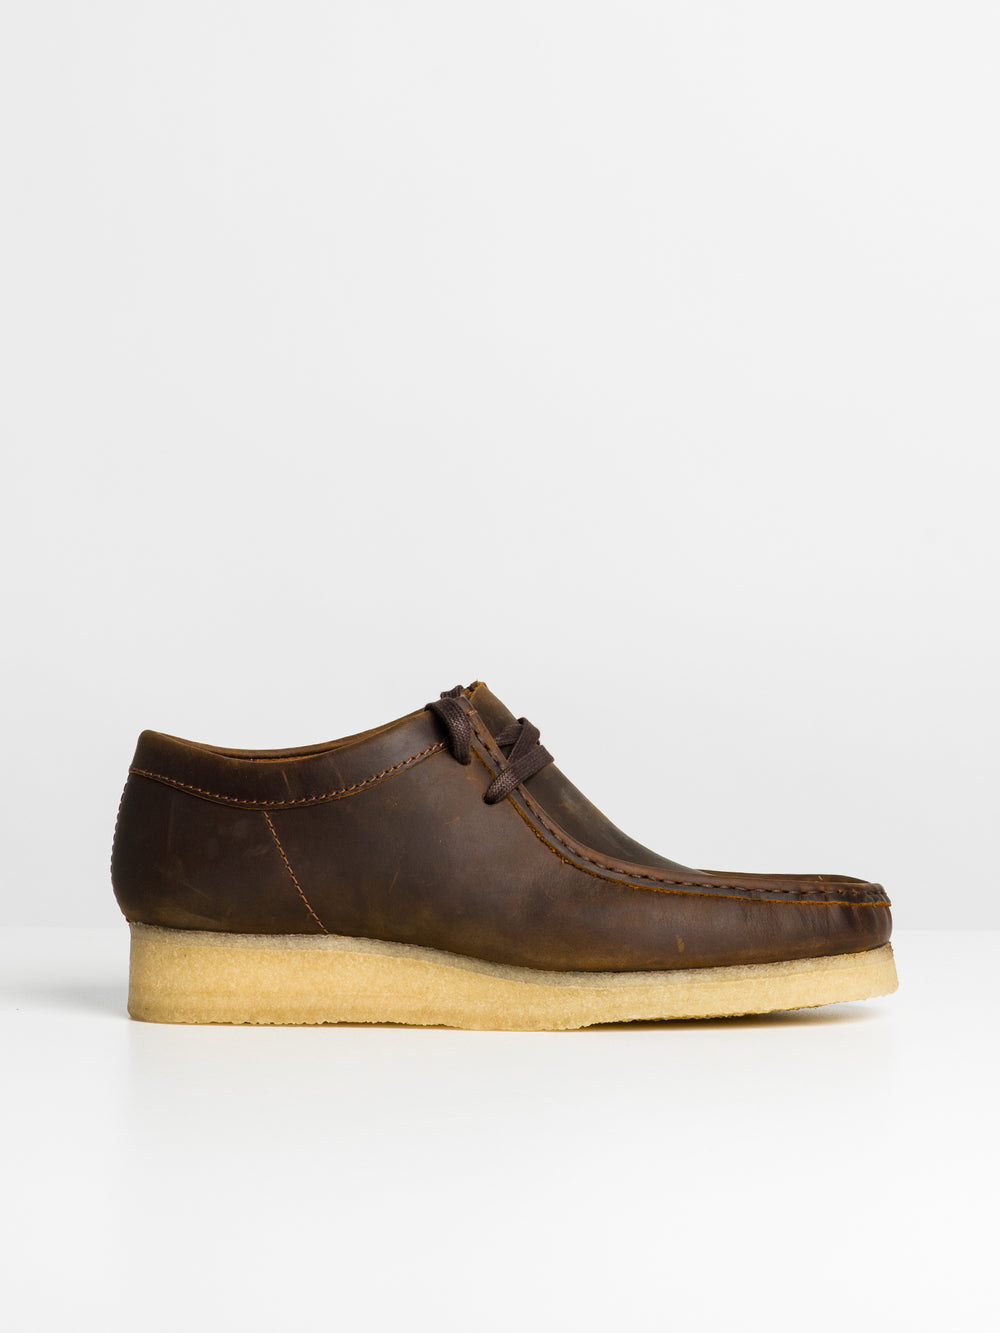 MENS CLARKS WALLABEE CLEARANCE